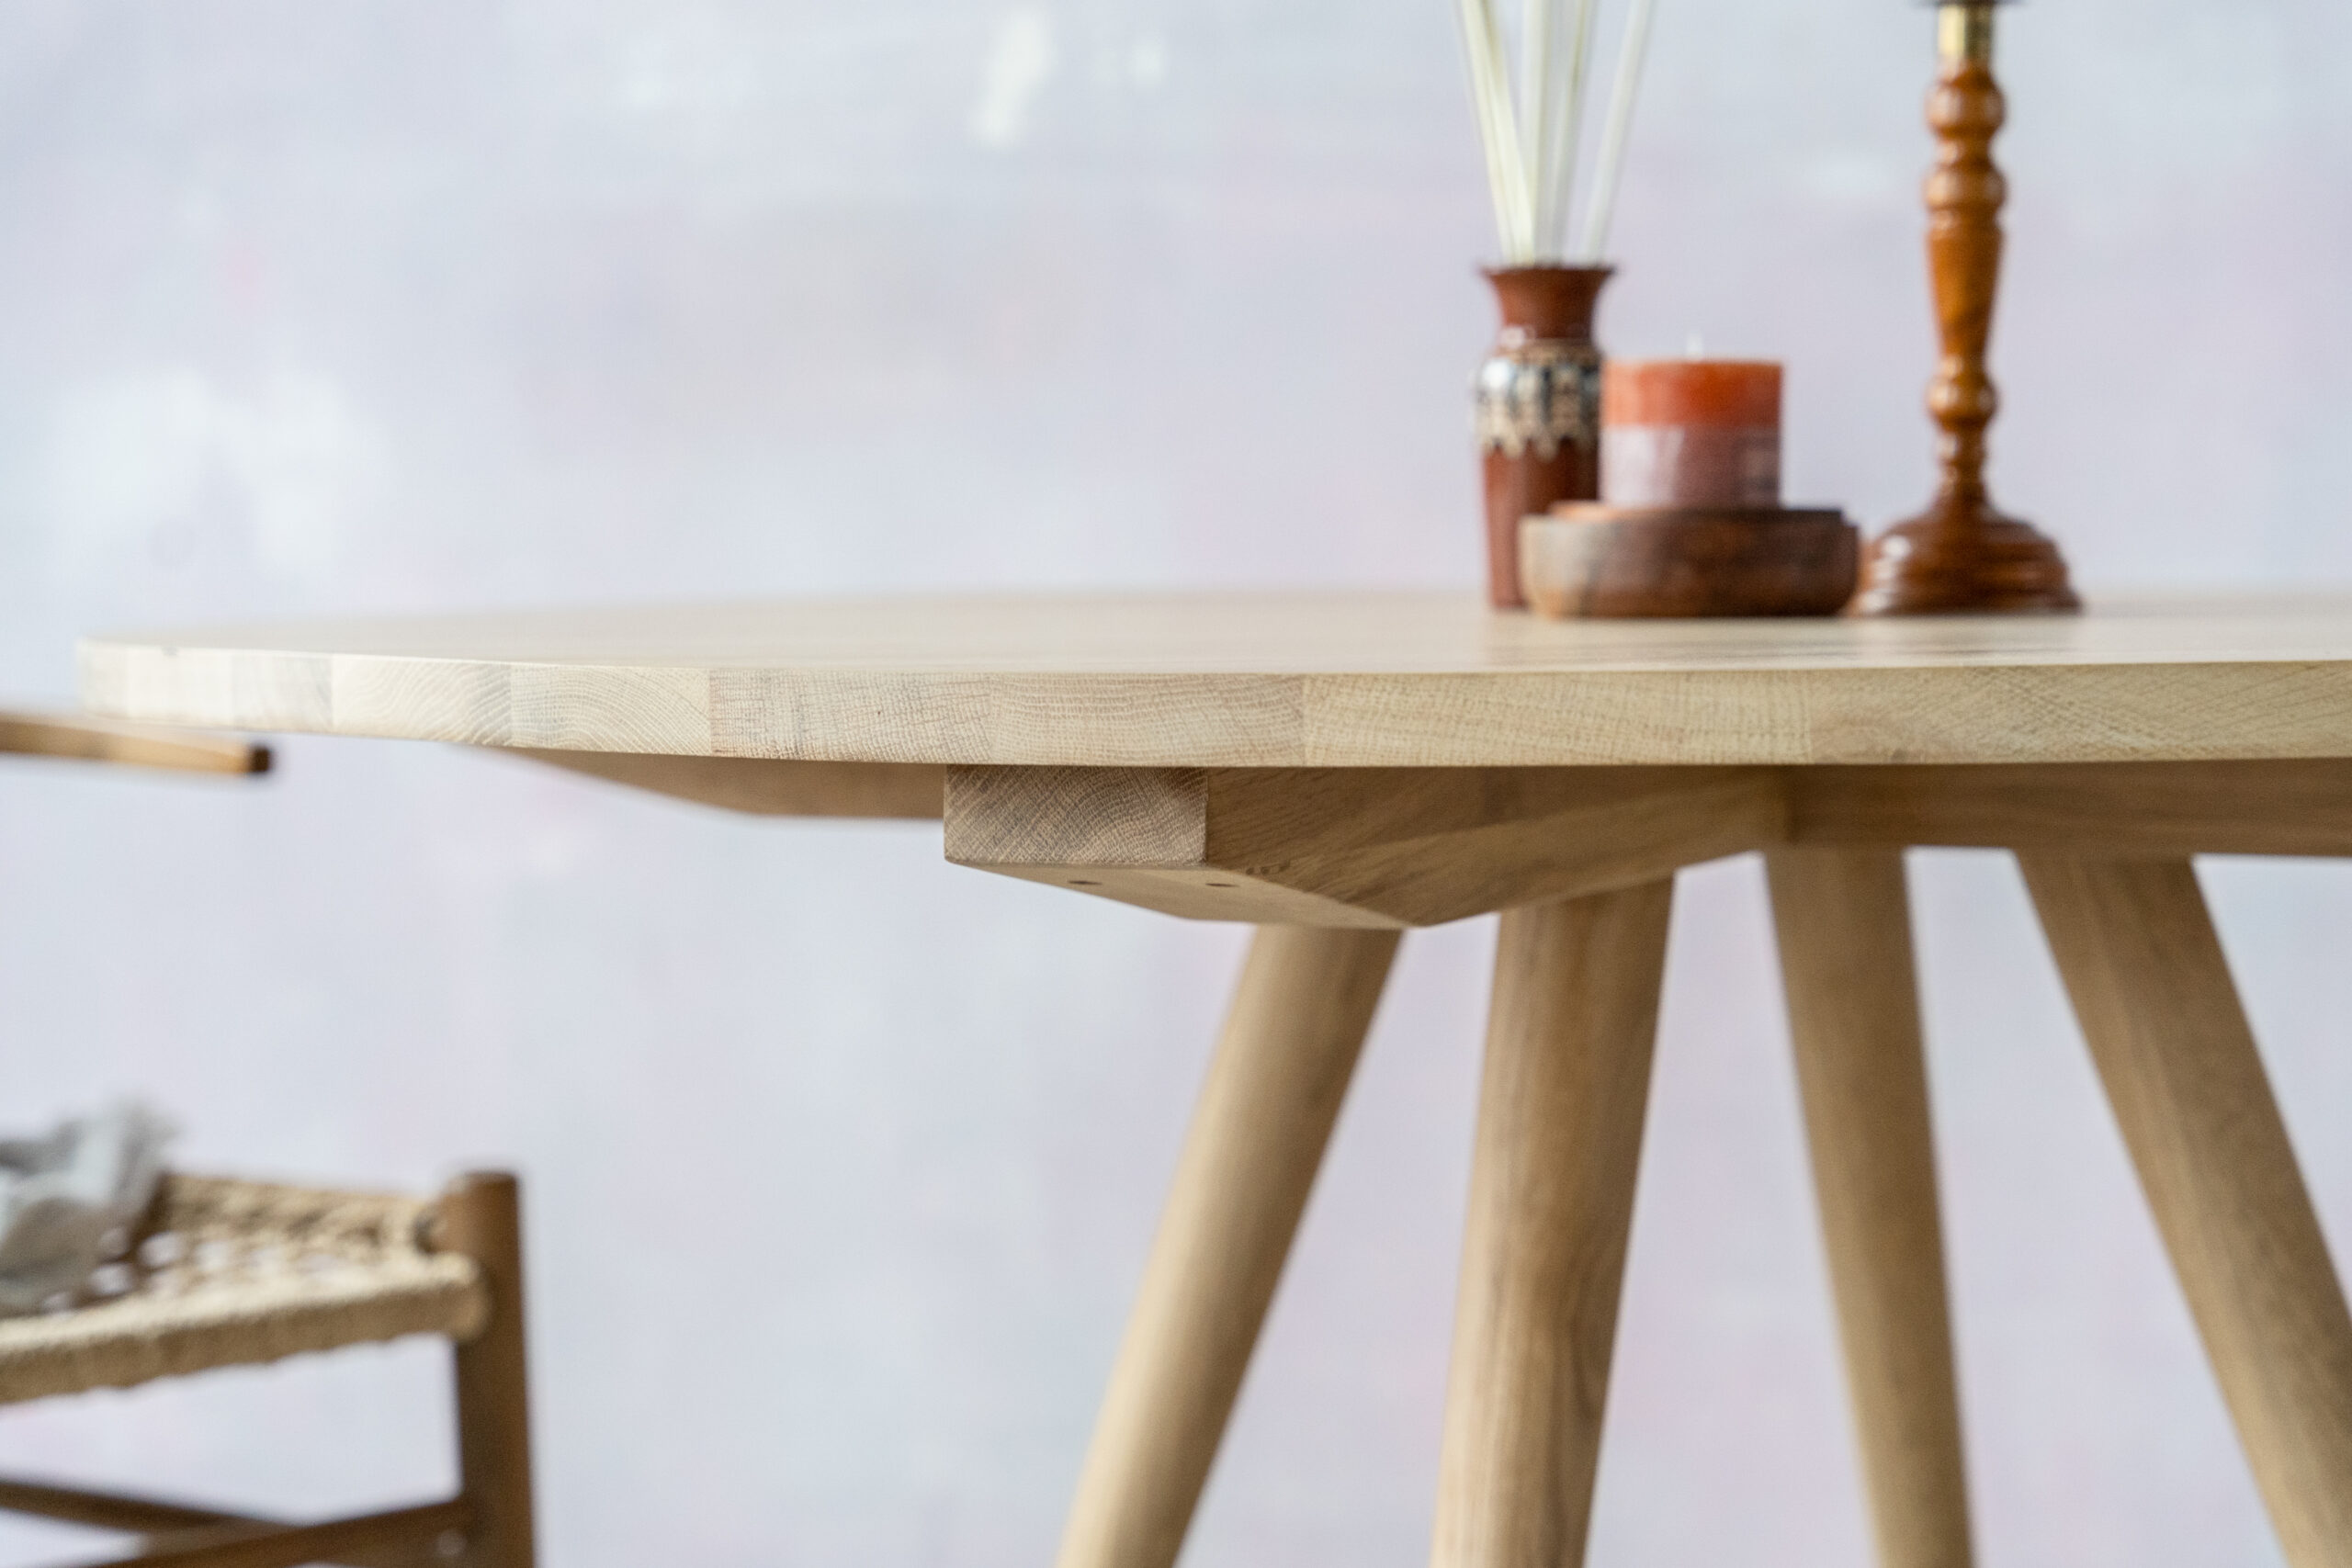 Solid Oak Dining Tables & Natural Raw Wood Finish